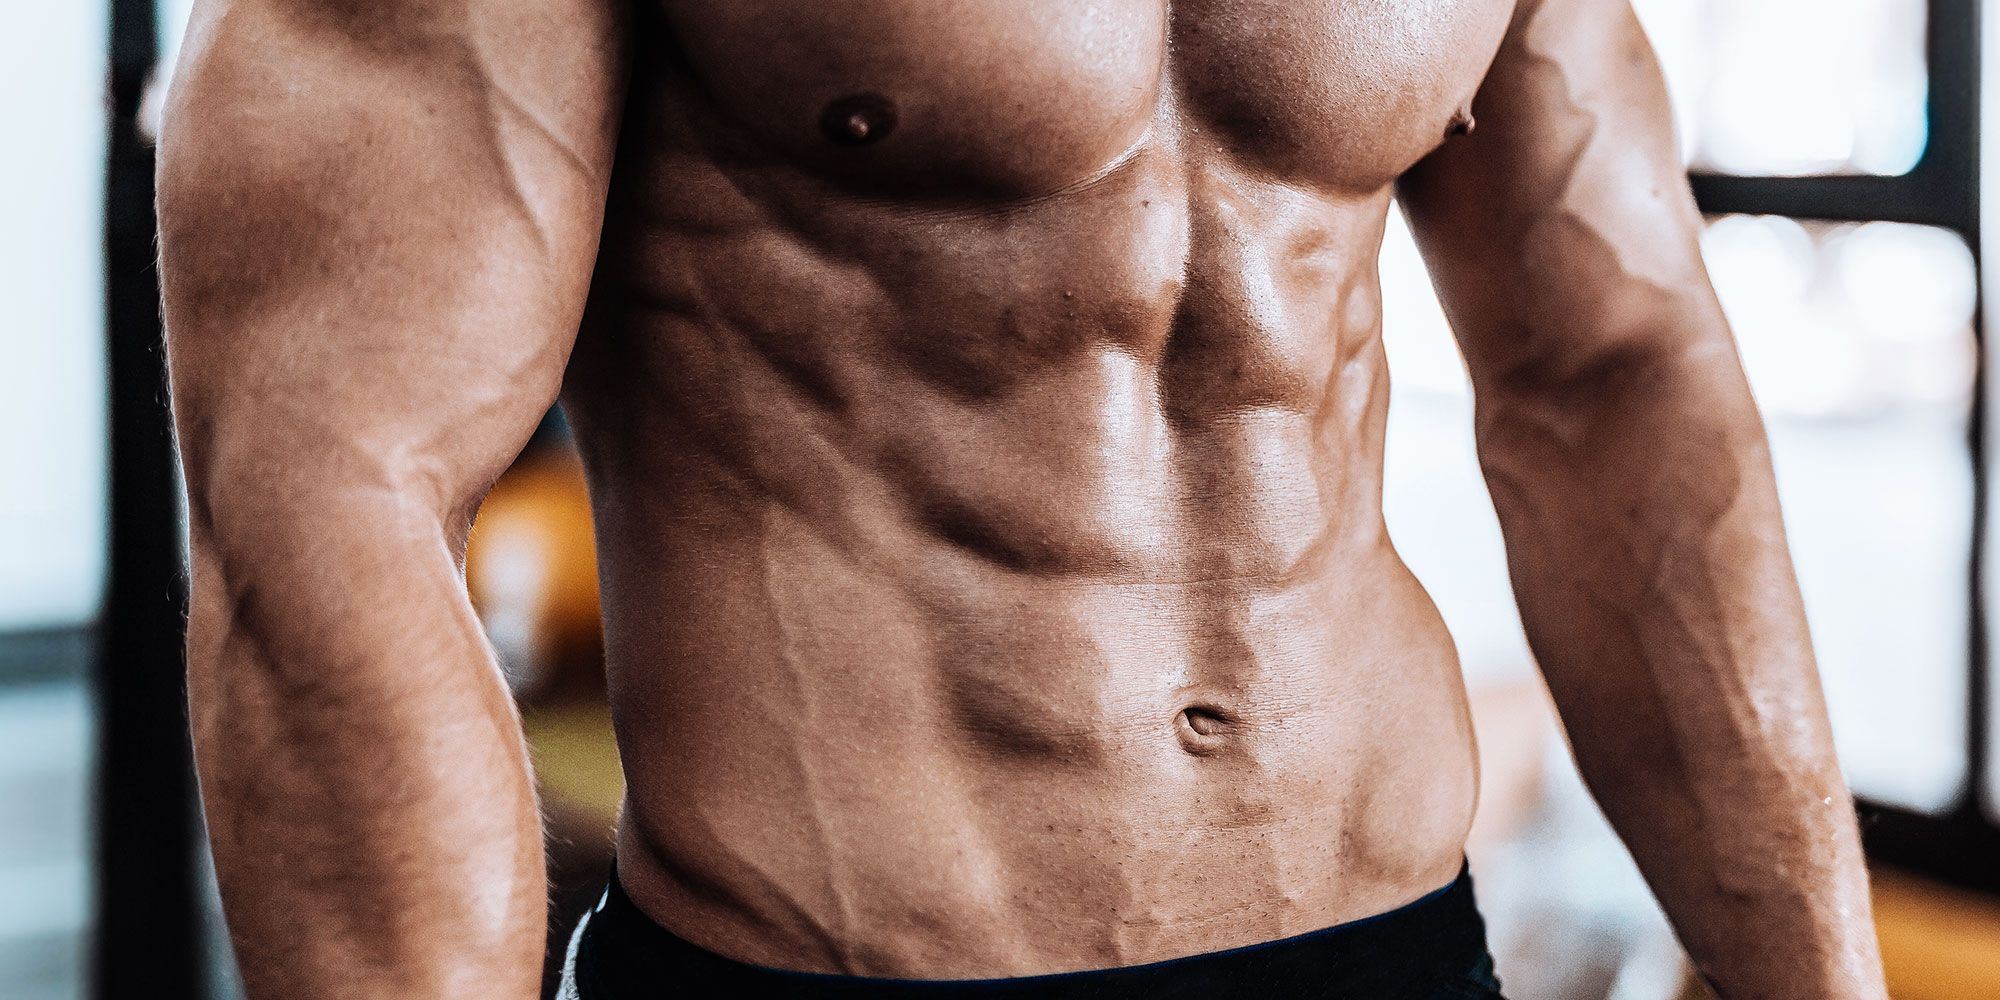 Guys With Six-Pack Abs Share What Its Like to Be Ripped pic